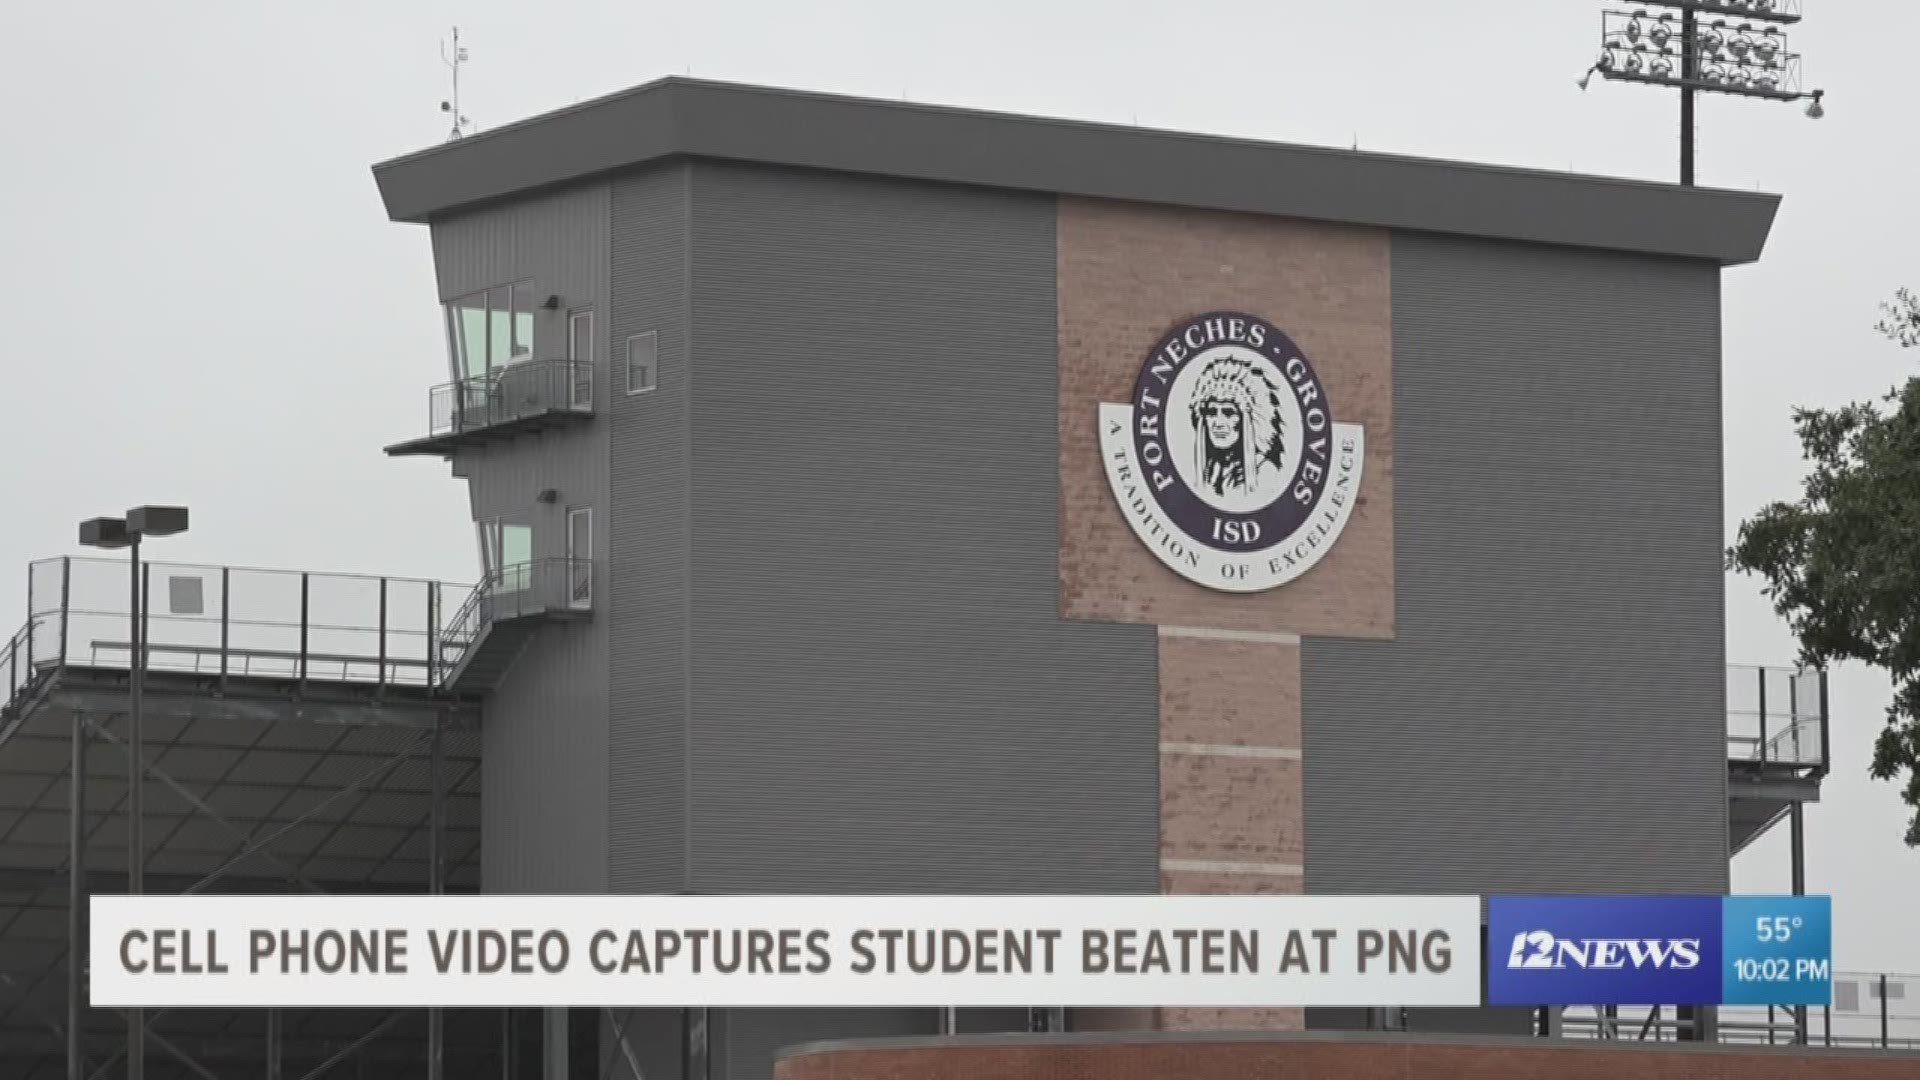 Cell phone video captures student beaten at PNG